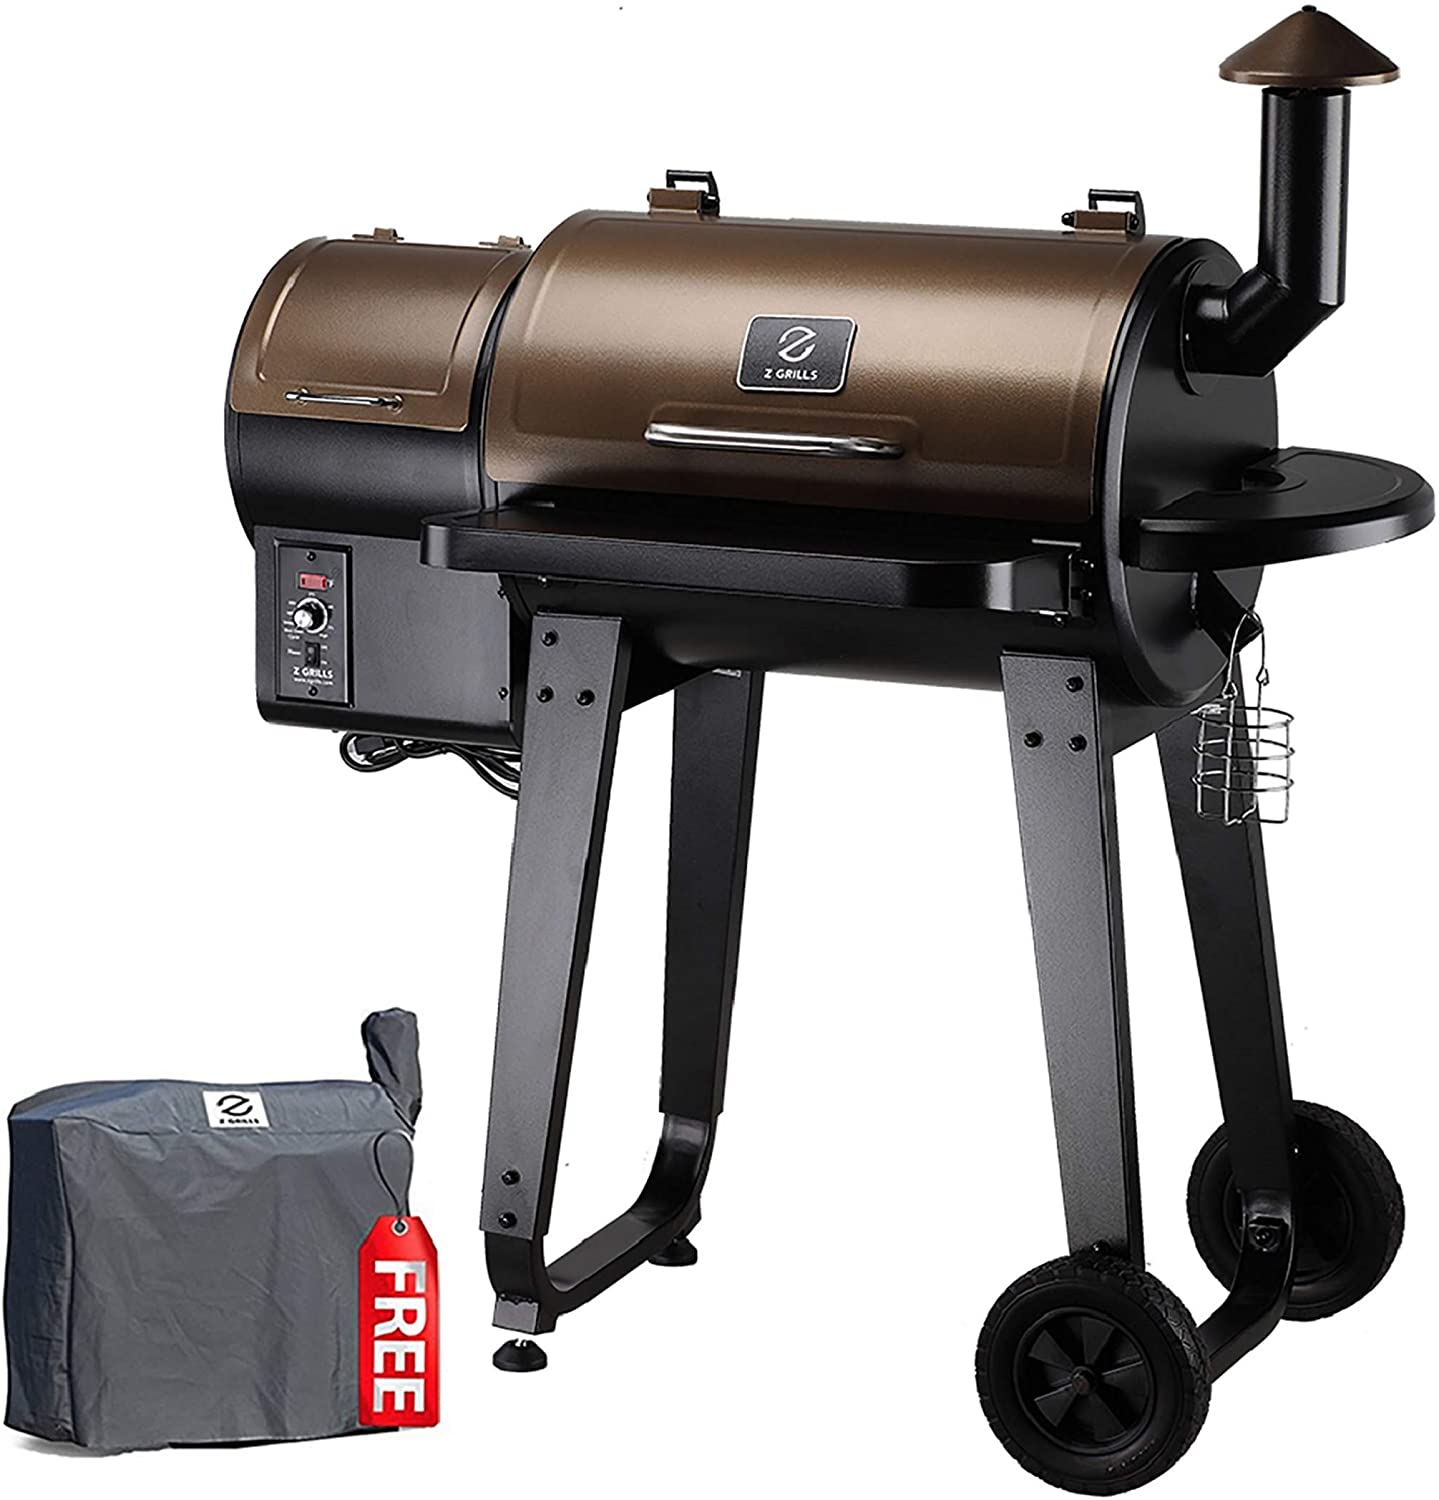 Z GRILLS 450A Smart Wood Pellet Fired Grill 6 in 1 Outdoor BBQ Smoker 450 SQ inches Cooking Space Barbecue Grilling Bronze - image 1 of 10